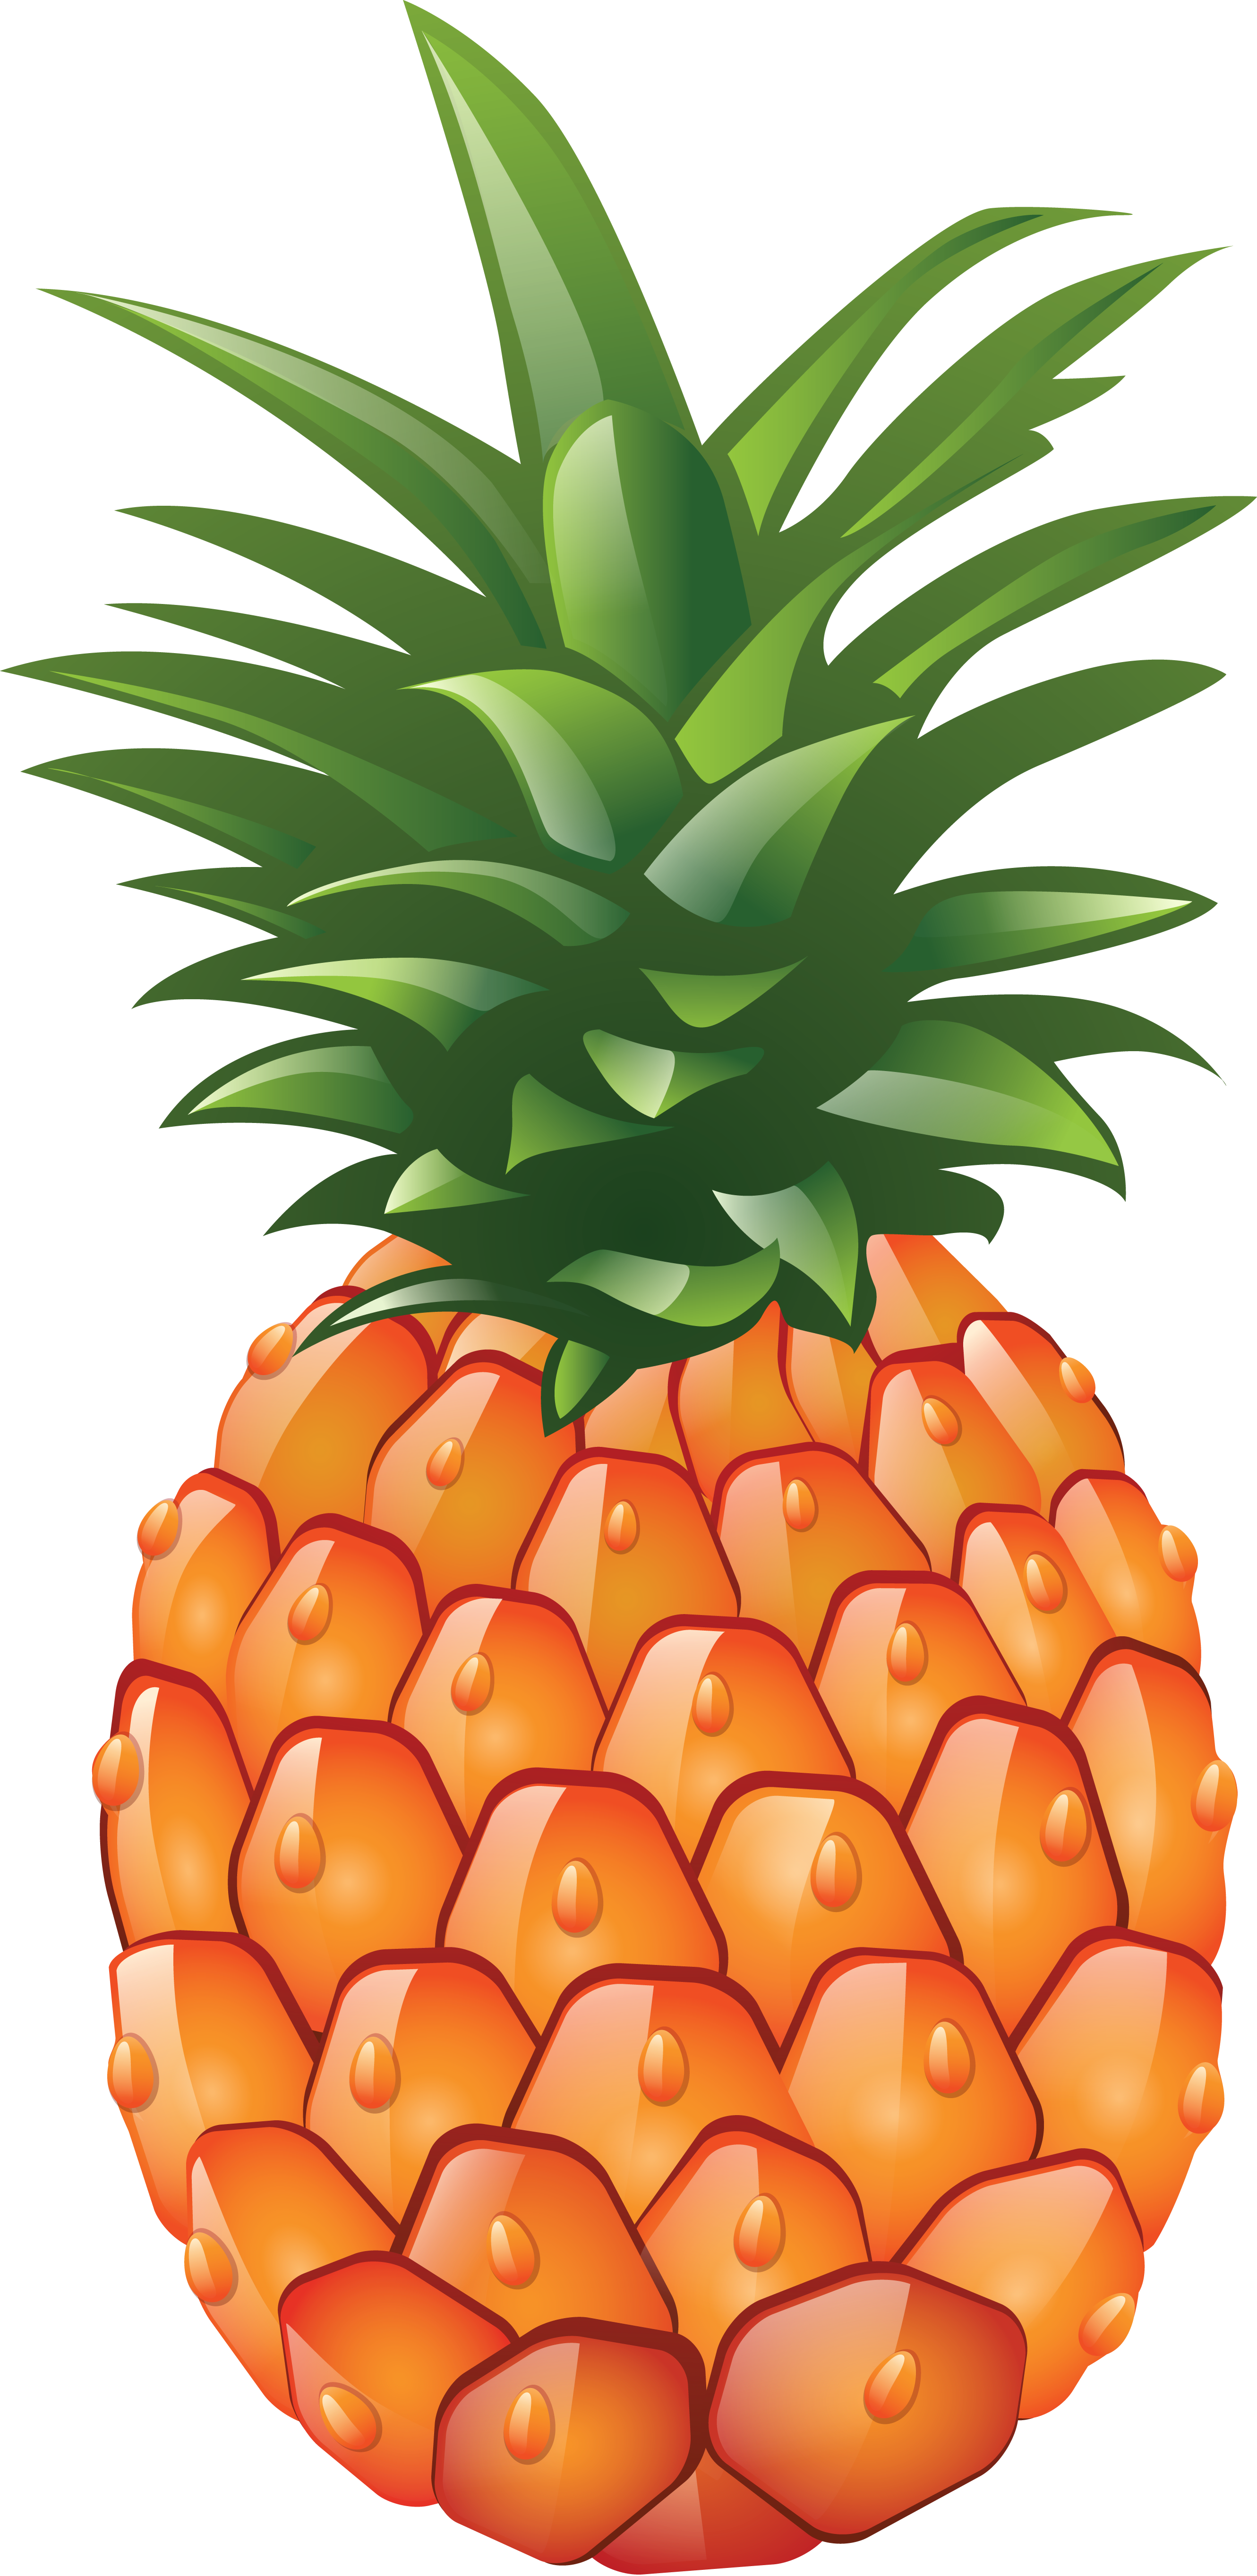 Pineapple Images Pictures Download Clipart Clipart